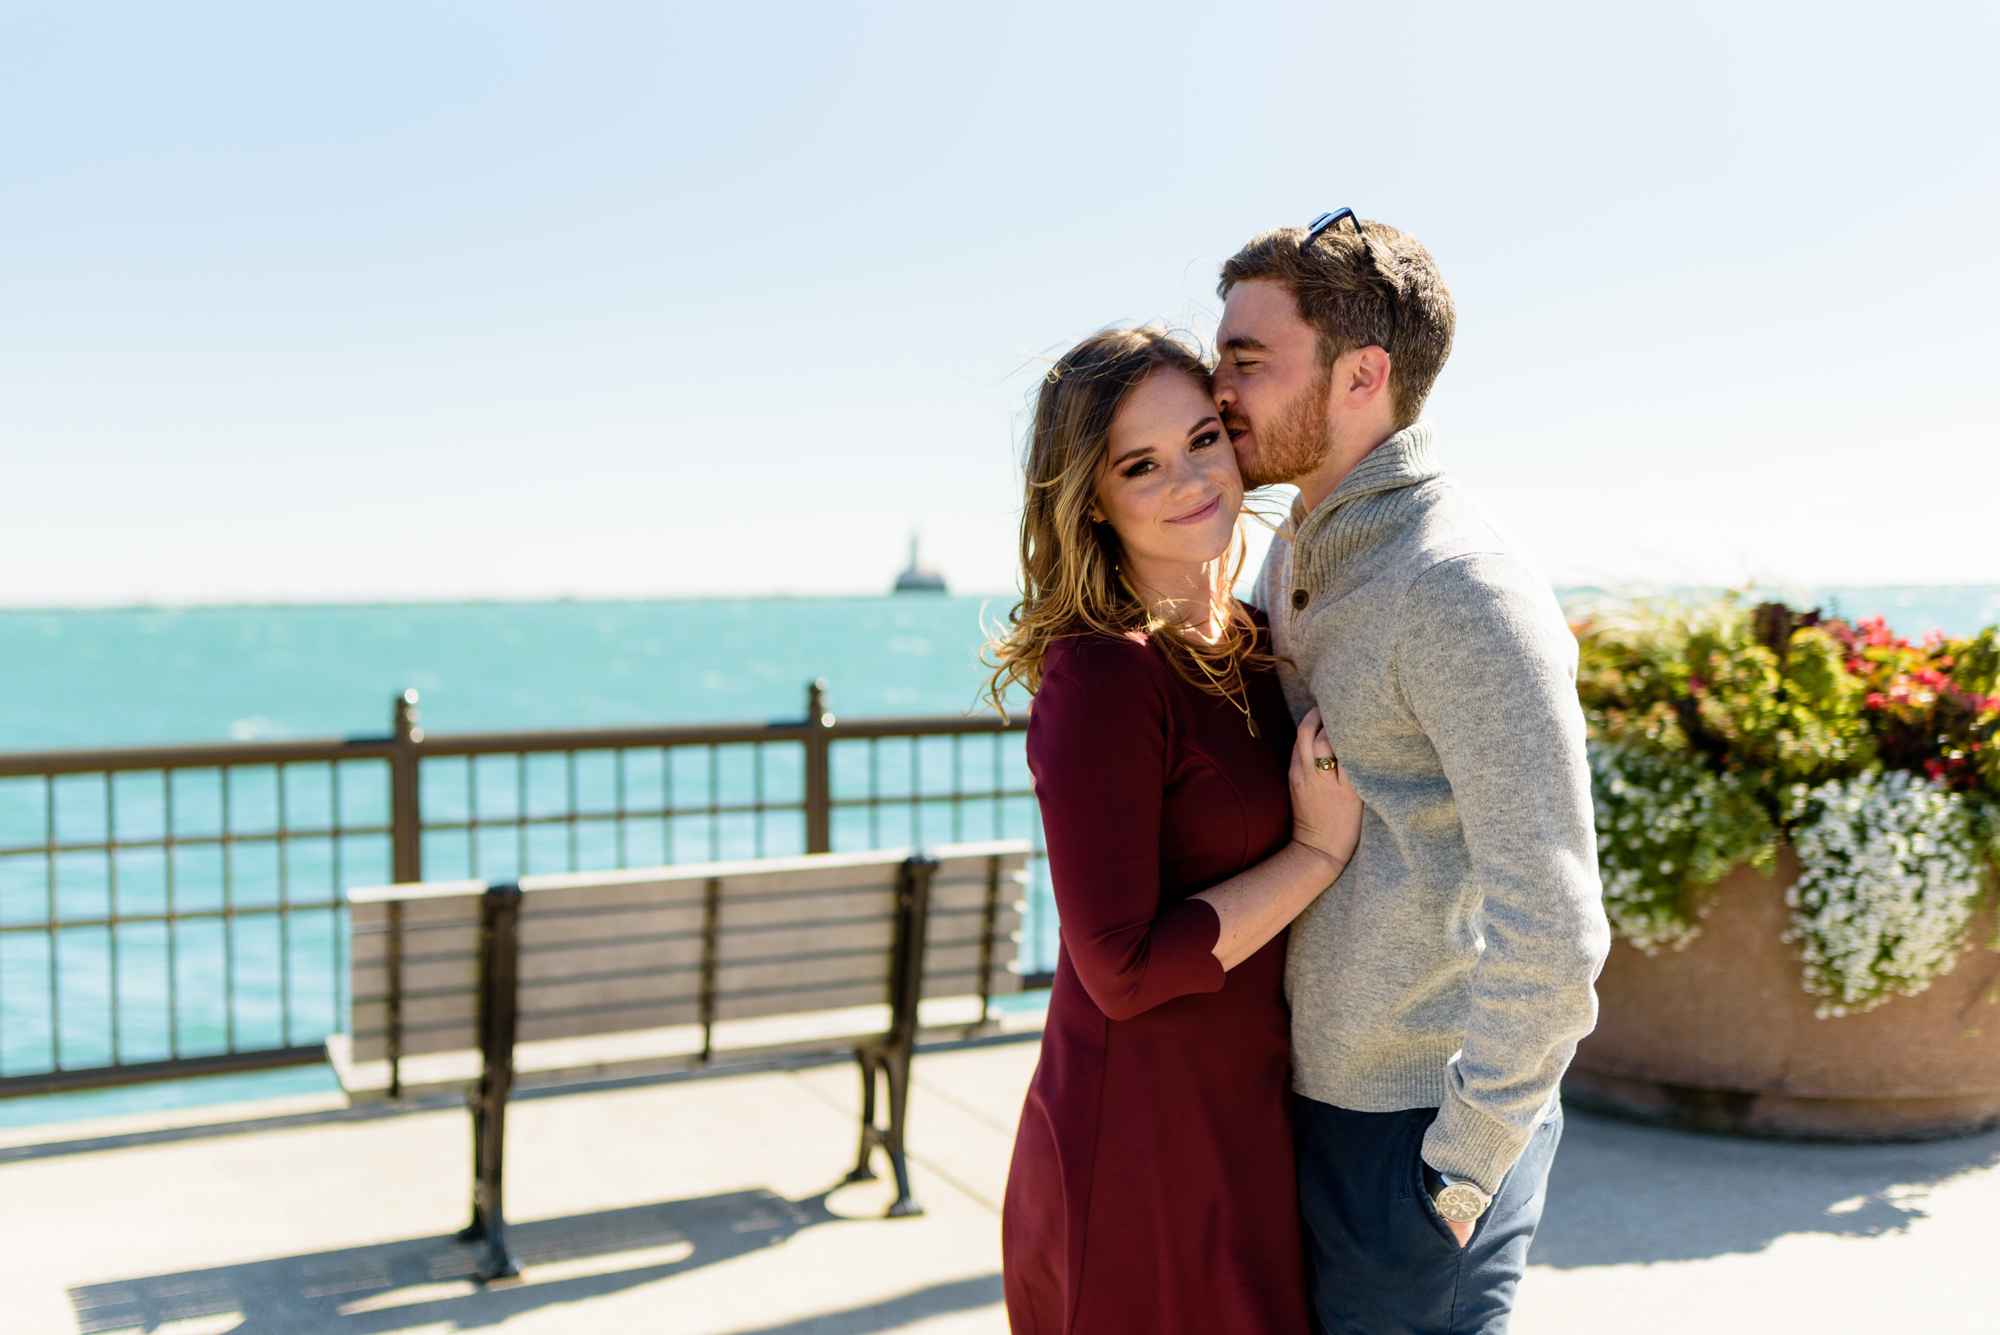 Engaged couple at navy pier in Chicago